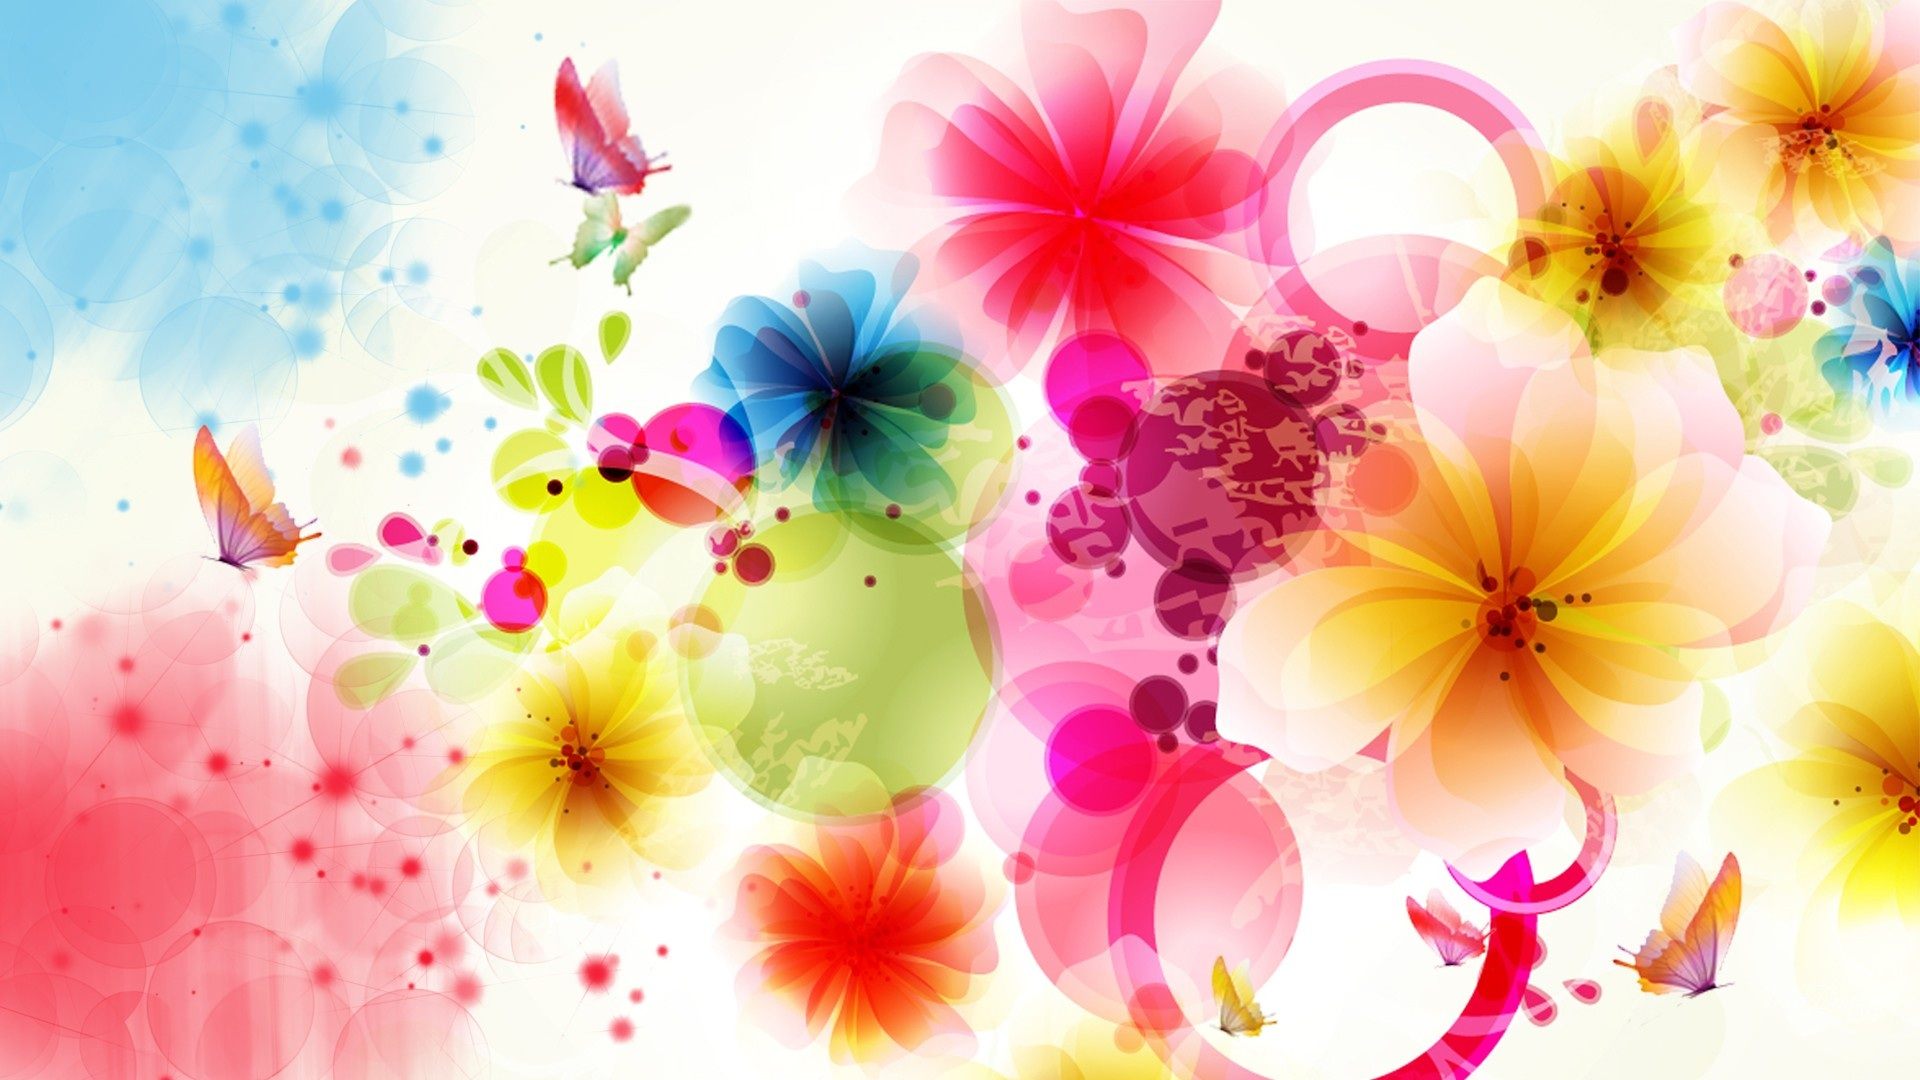 Colorful Flowers Background Hd - HD Wallpaper 